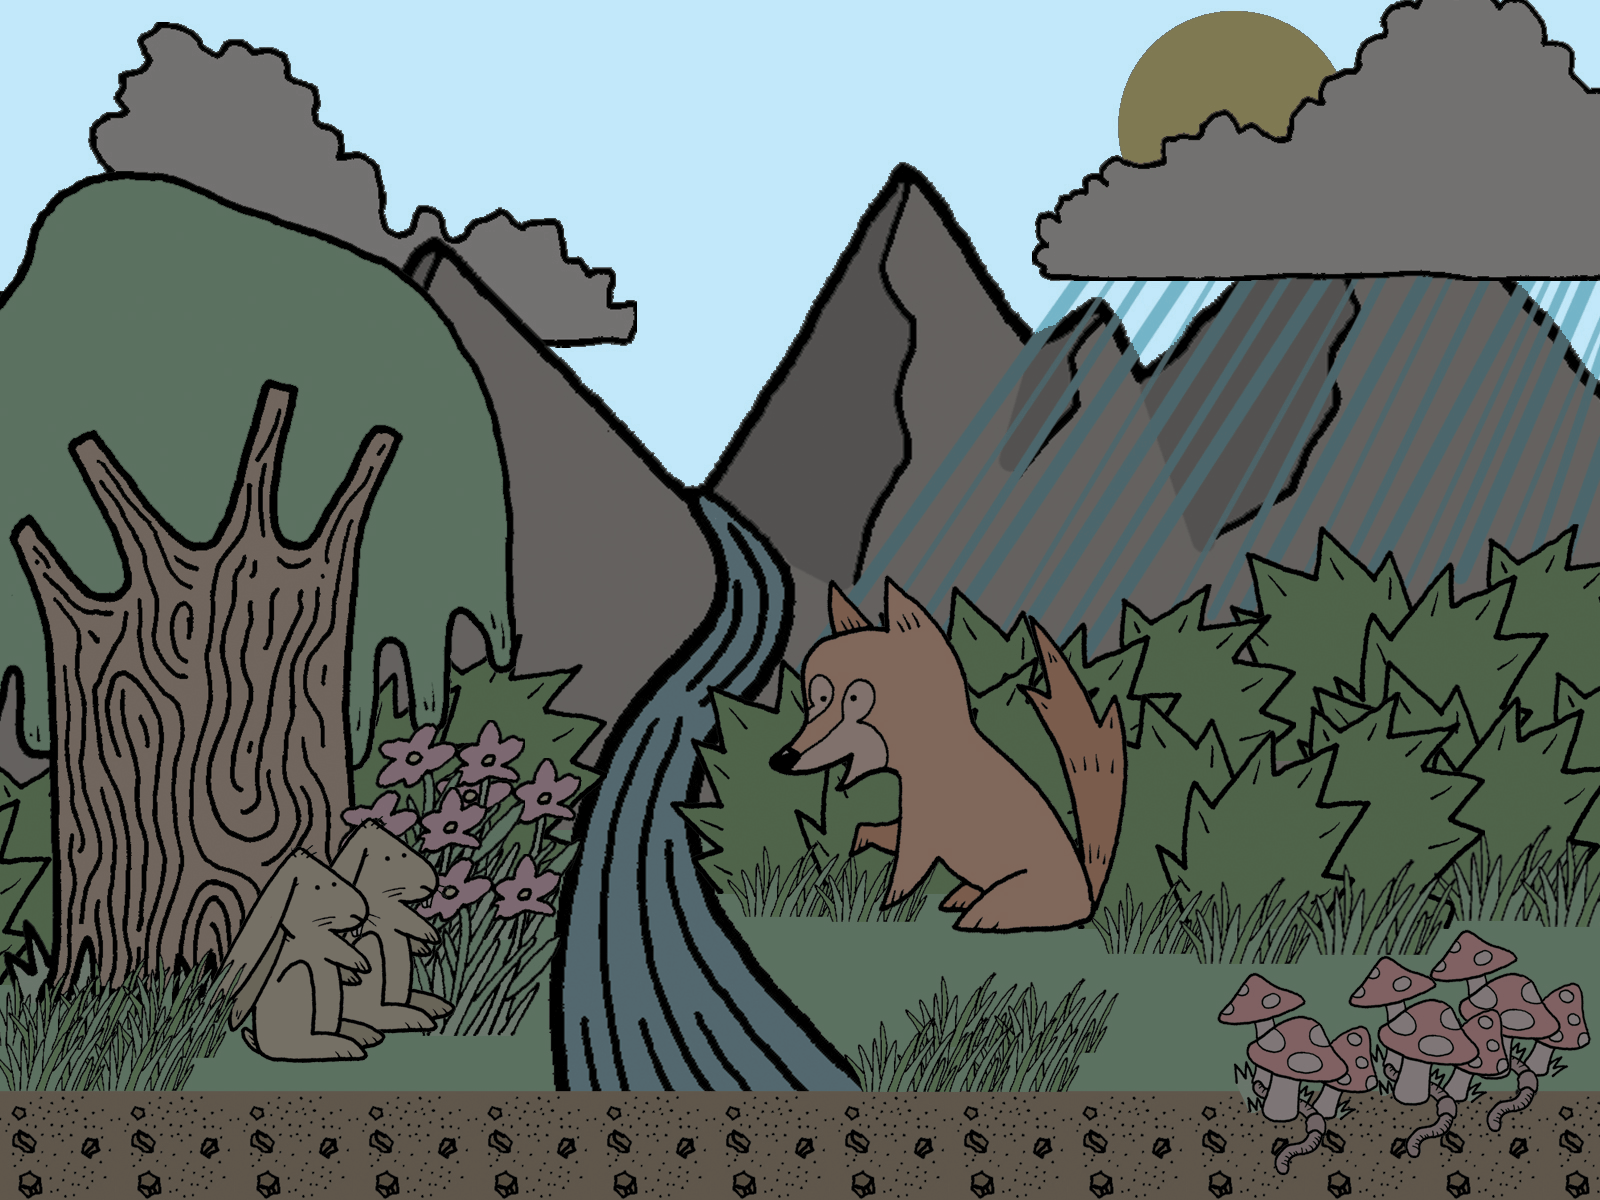 Cartoon representation of a forest with plants and animals, highlighting an analogy between atmosphere (a blue sky) and writing program kairotic moments.